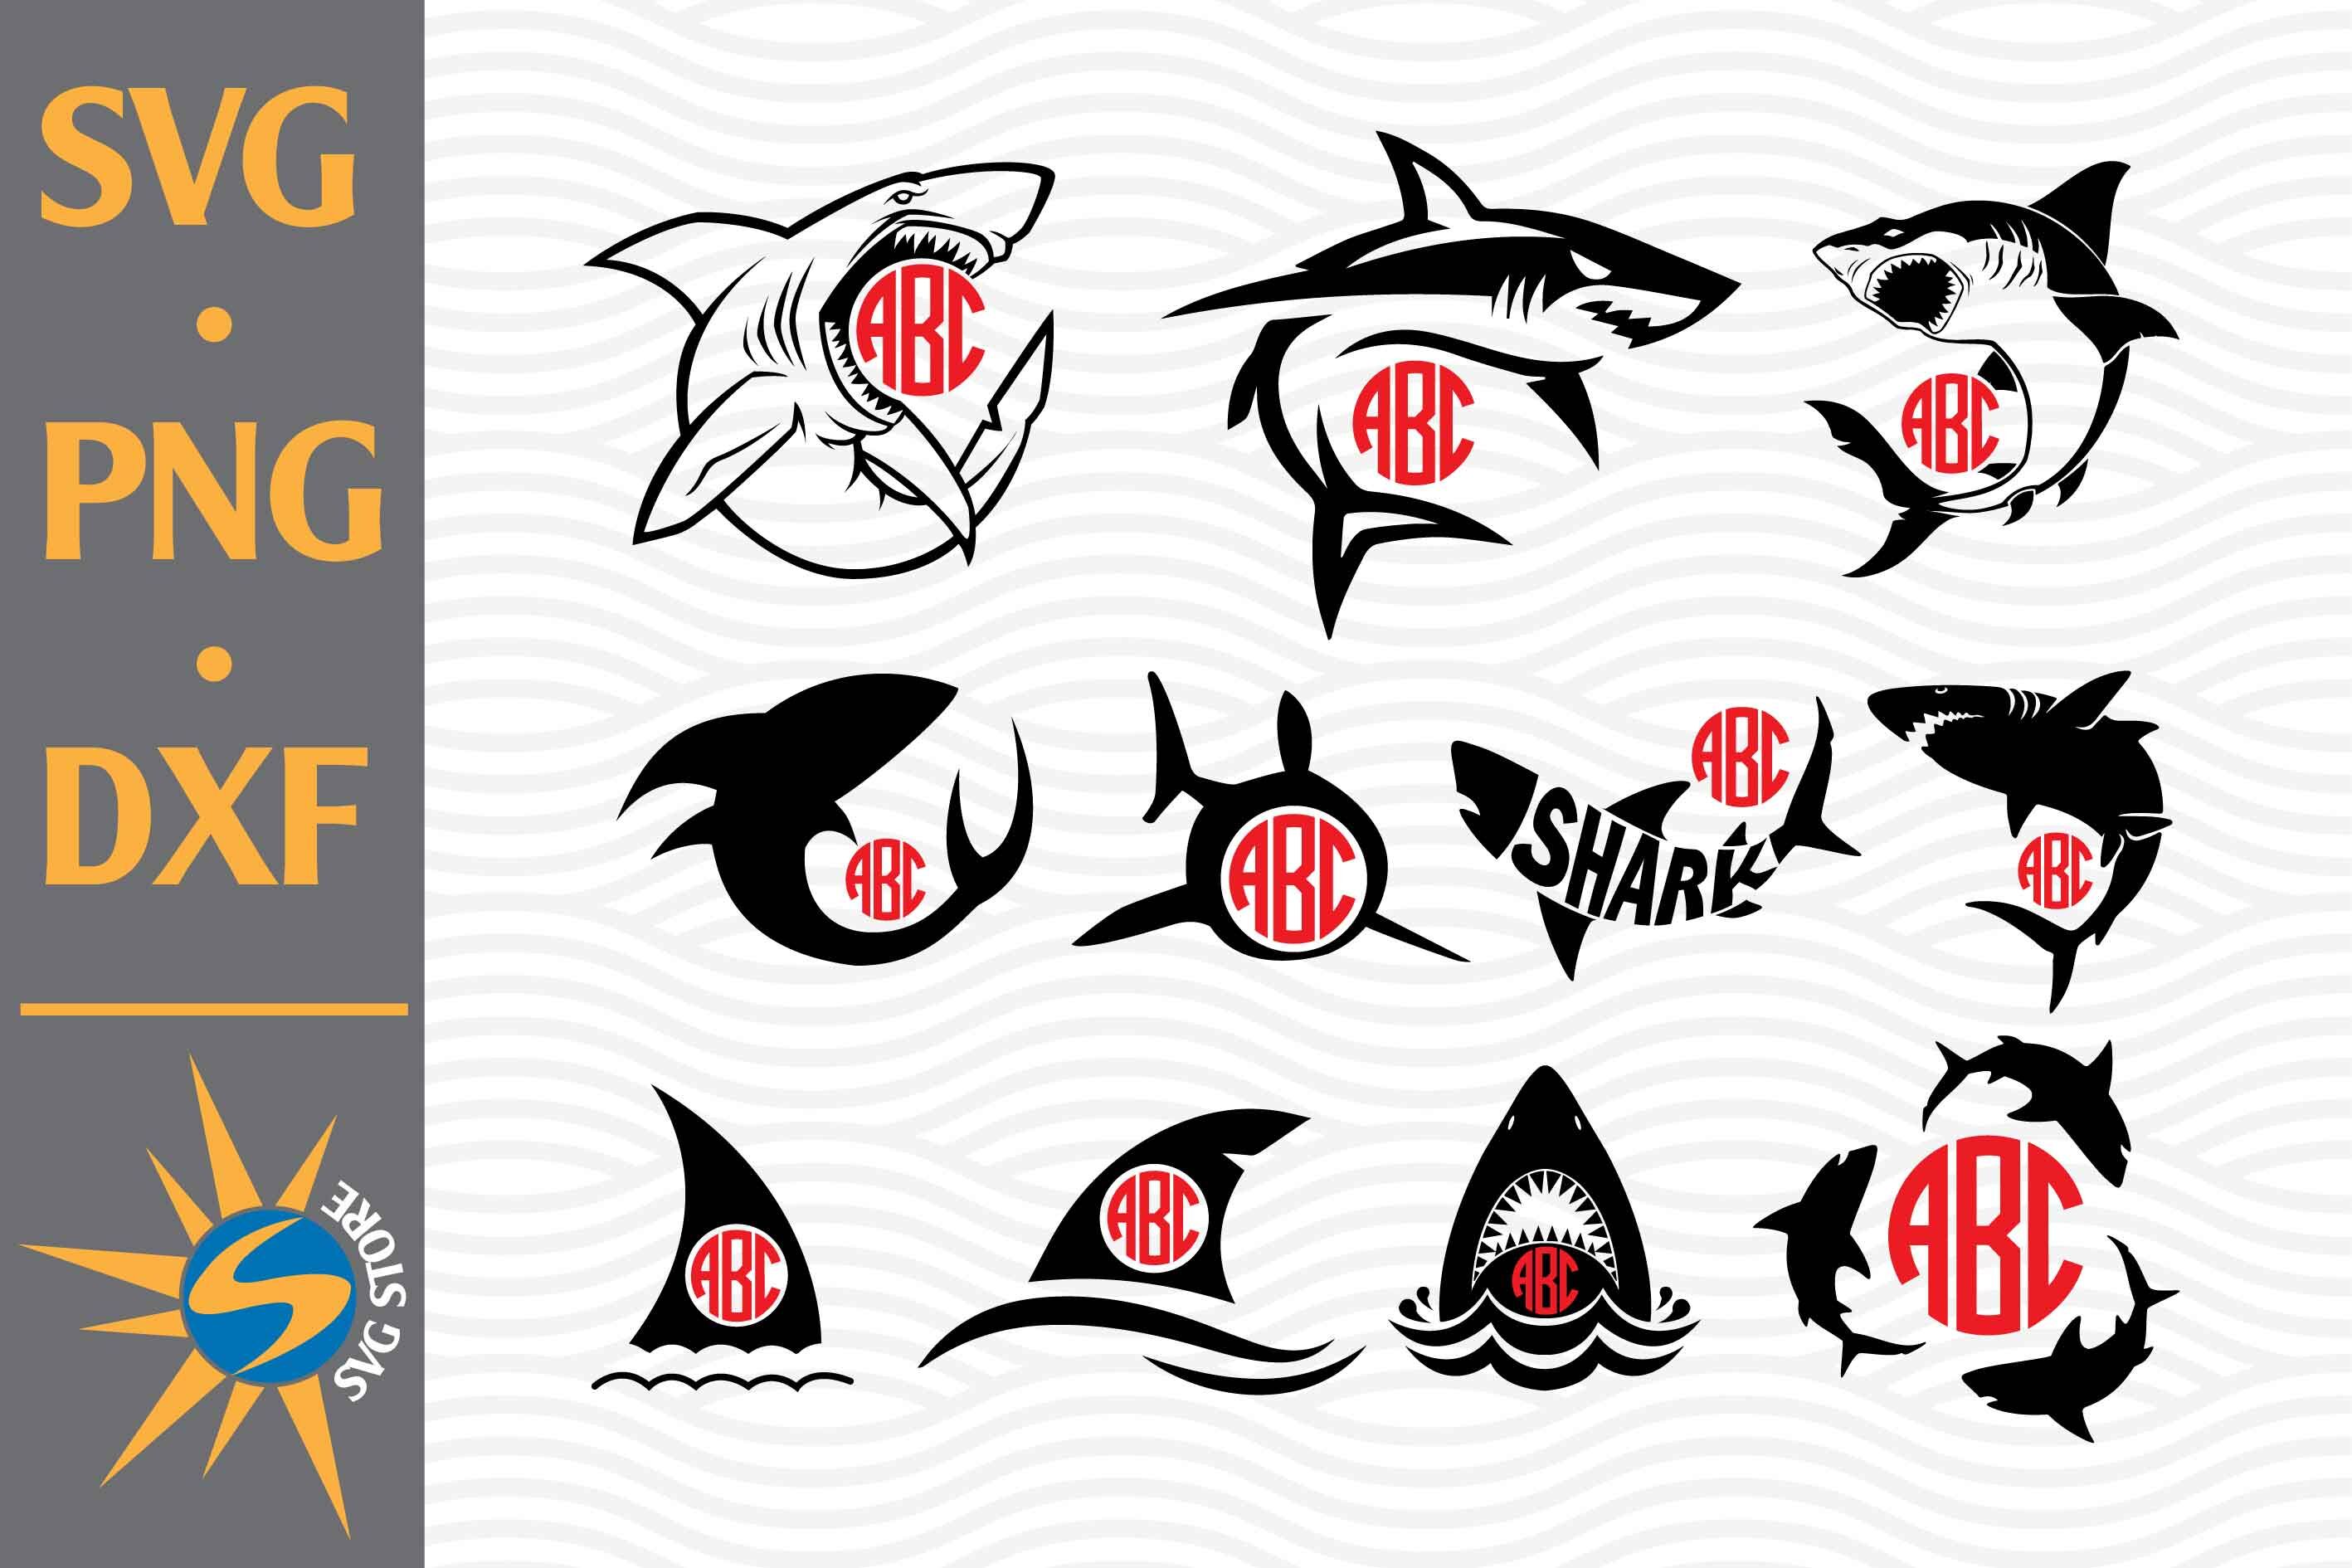 Shark Monogram SVG, PNG, DXF Digital Files Include By ...